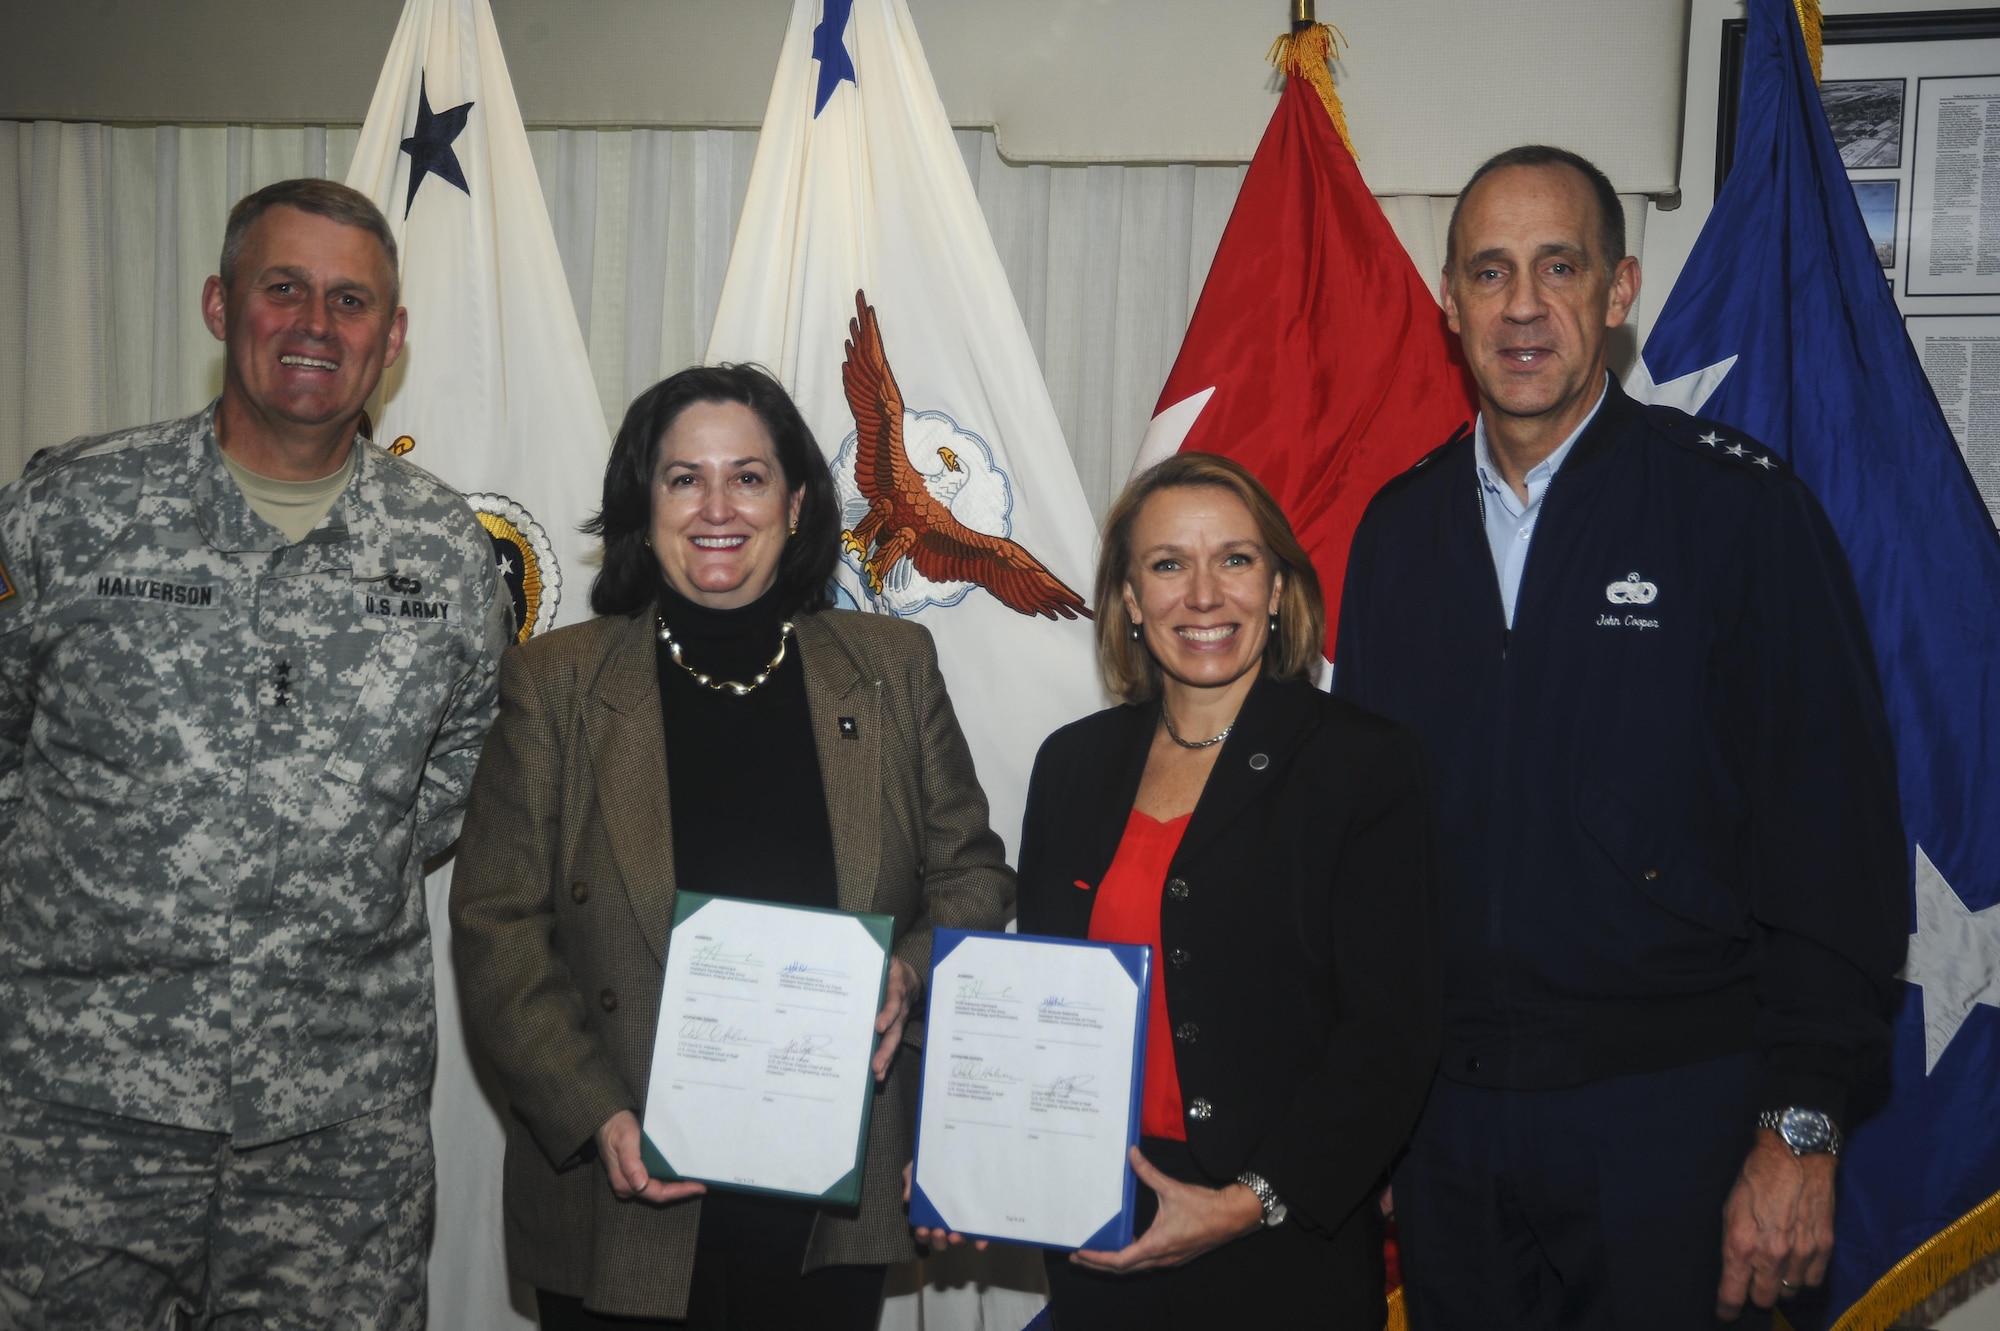 From left to right, Lt. Gen. David Halverson, the Army assistant chief of staff for installation management; Katherine Hammock, the assistant secretary of the Army for installations, energy and environment; Miranda Ballentine, the assistant secretary of the Air Force for installations, environment and energy; and Lt. Gen. John Cooper, the Air Force deputy chief of staff for logistics, engineering and force protection, pose for a photo after signing a memorandum of agreement that formalizes the partnership between the service energy offices at the Pentagon, Washington, D.C., April 6, 2016. (U.S. Air Force photo/Antoinette Smith)